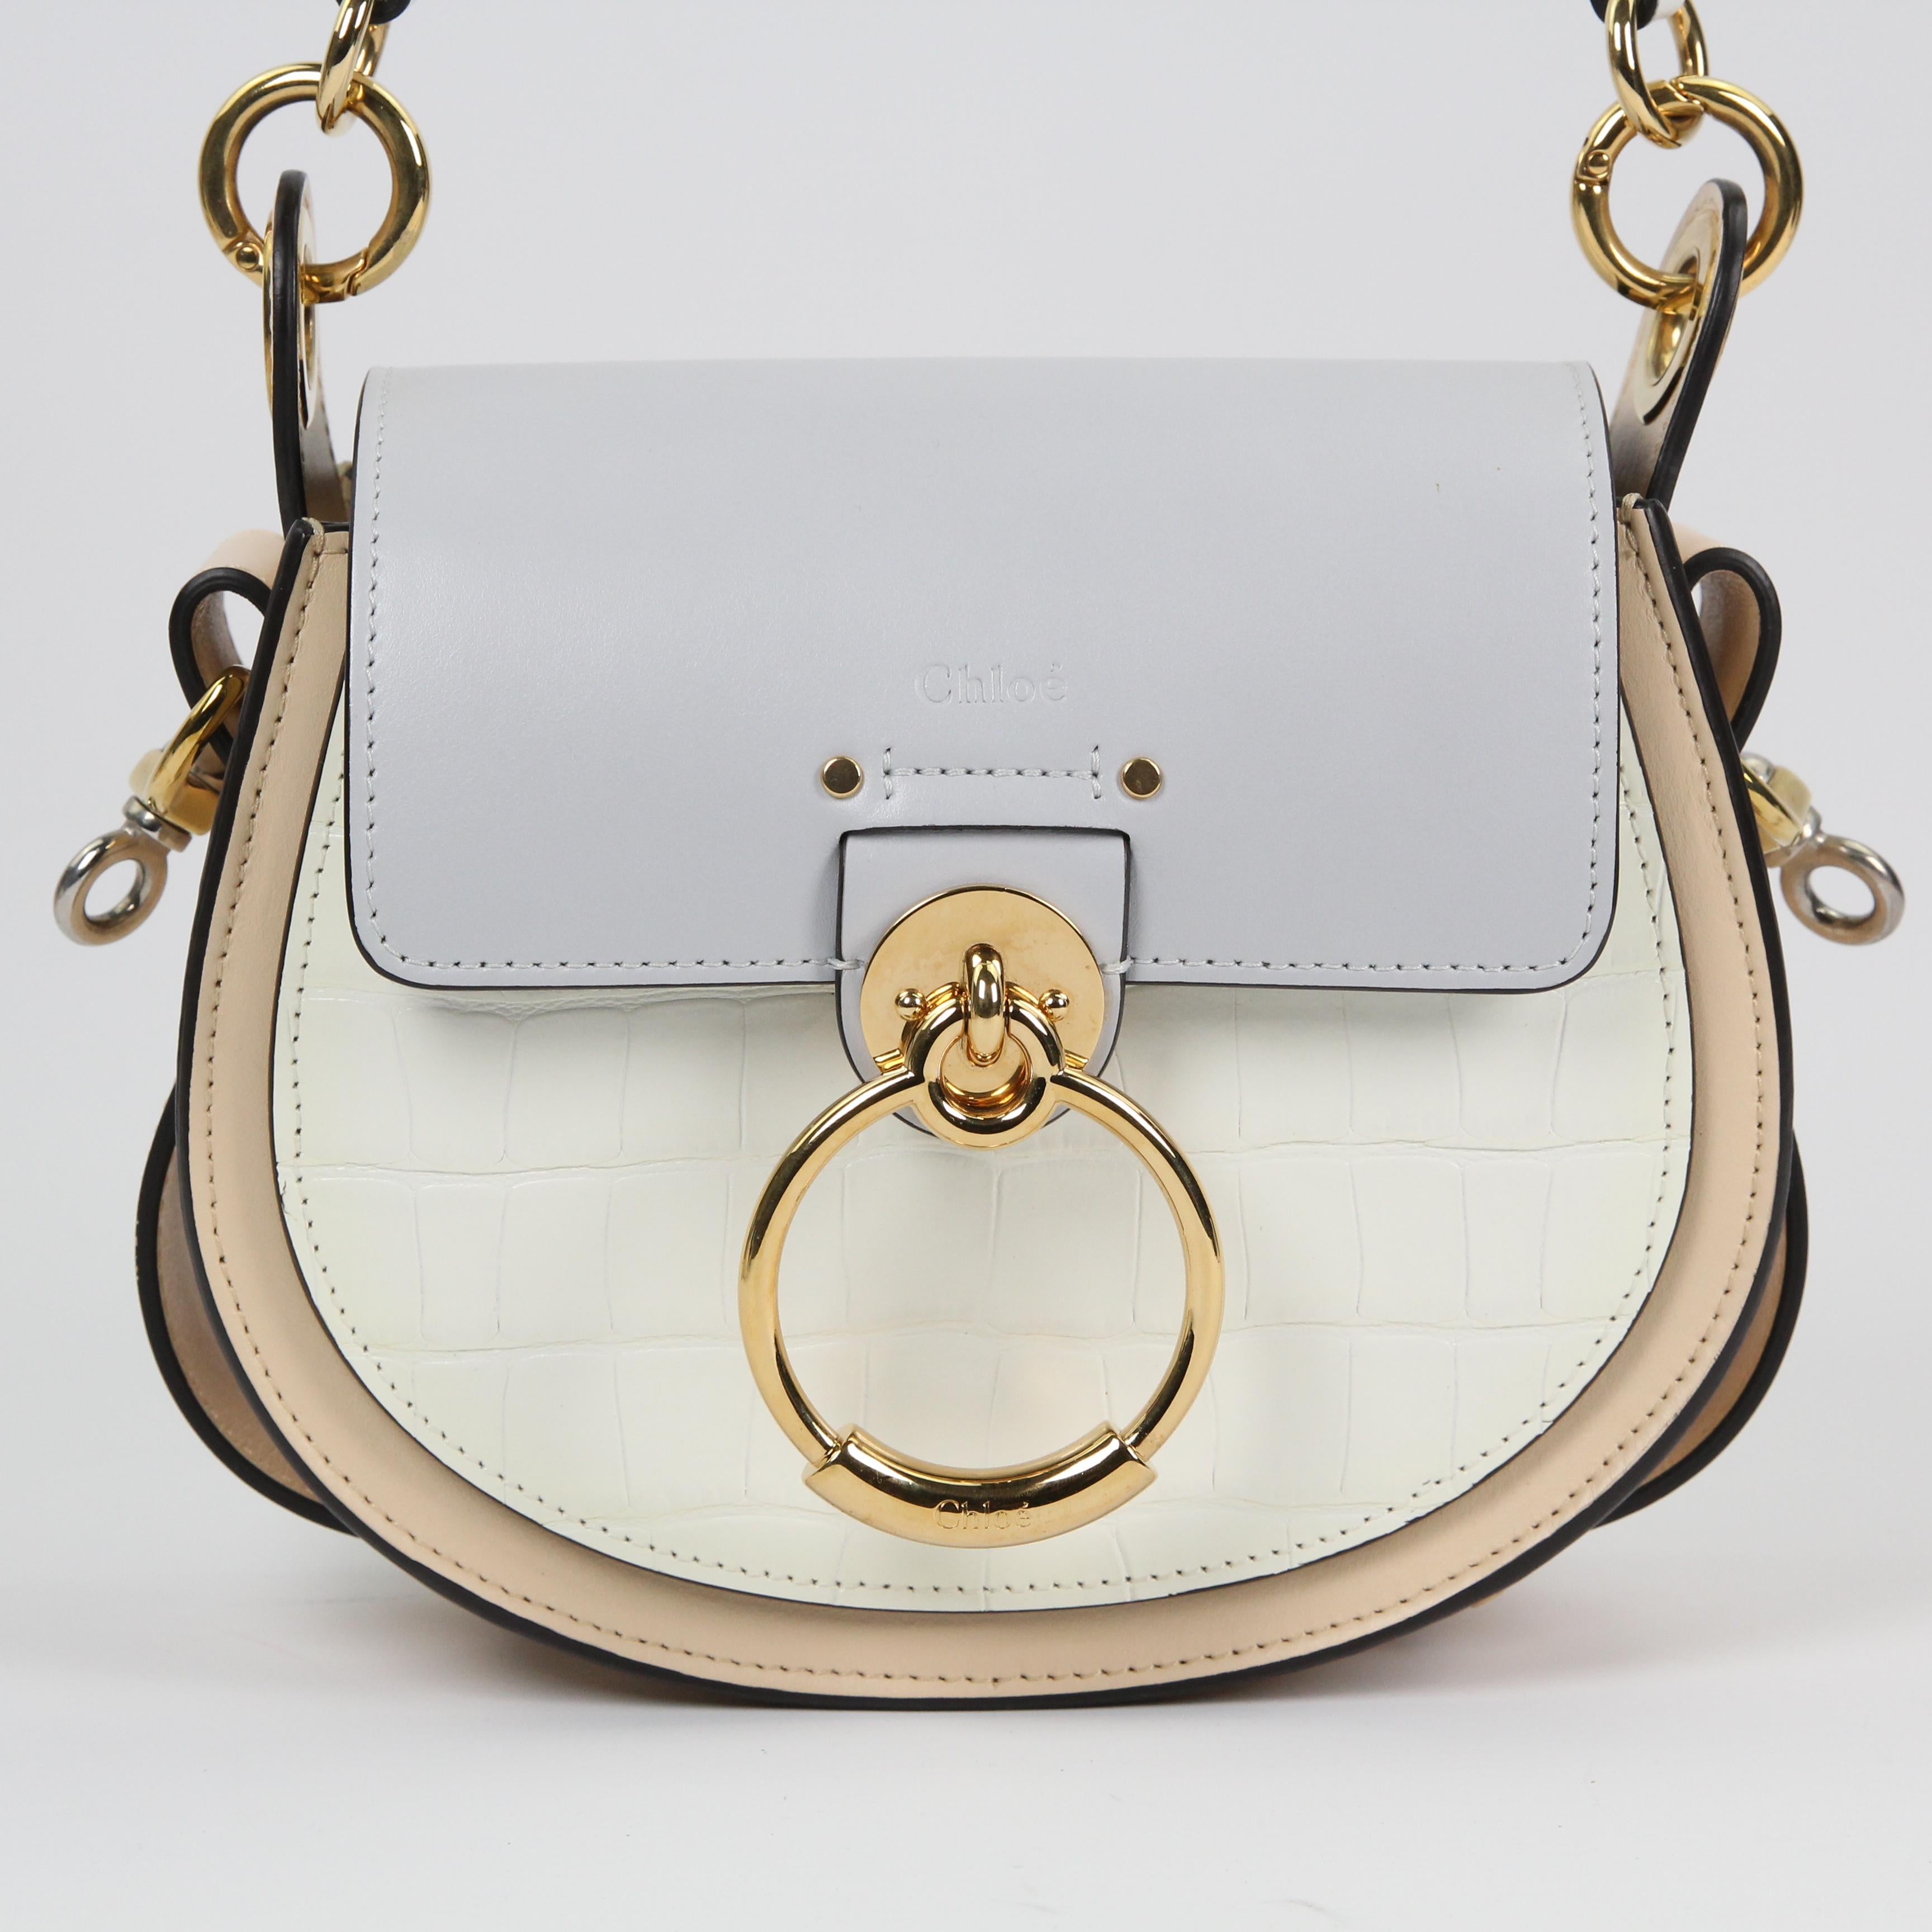 An update on the classic saddle bag, this Chloe Tess bag exudes feminine and pulls from its heritage to create a bag with all bells and whistles that we adore. This chic bag is crafted out of chic leather with a flap closure and a unique ring,